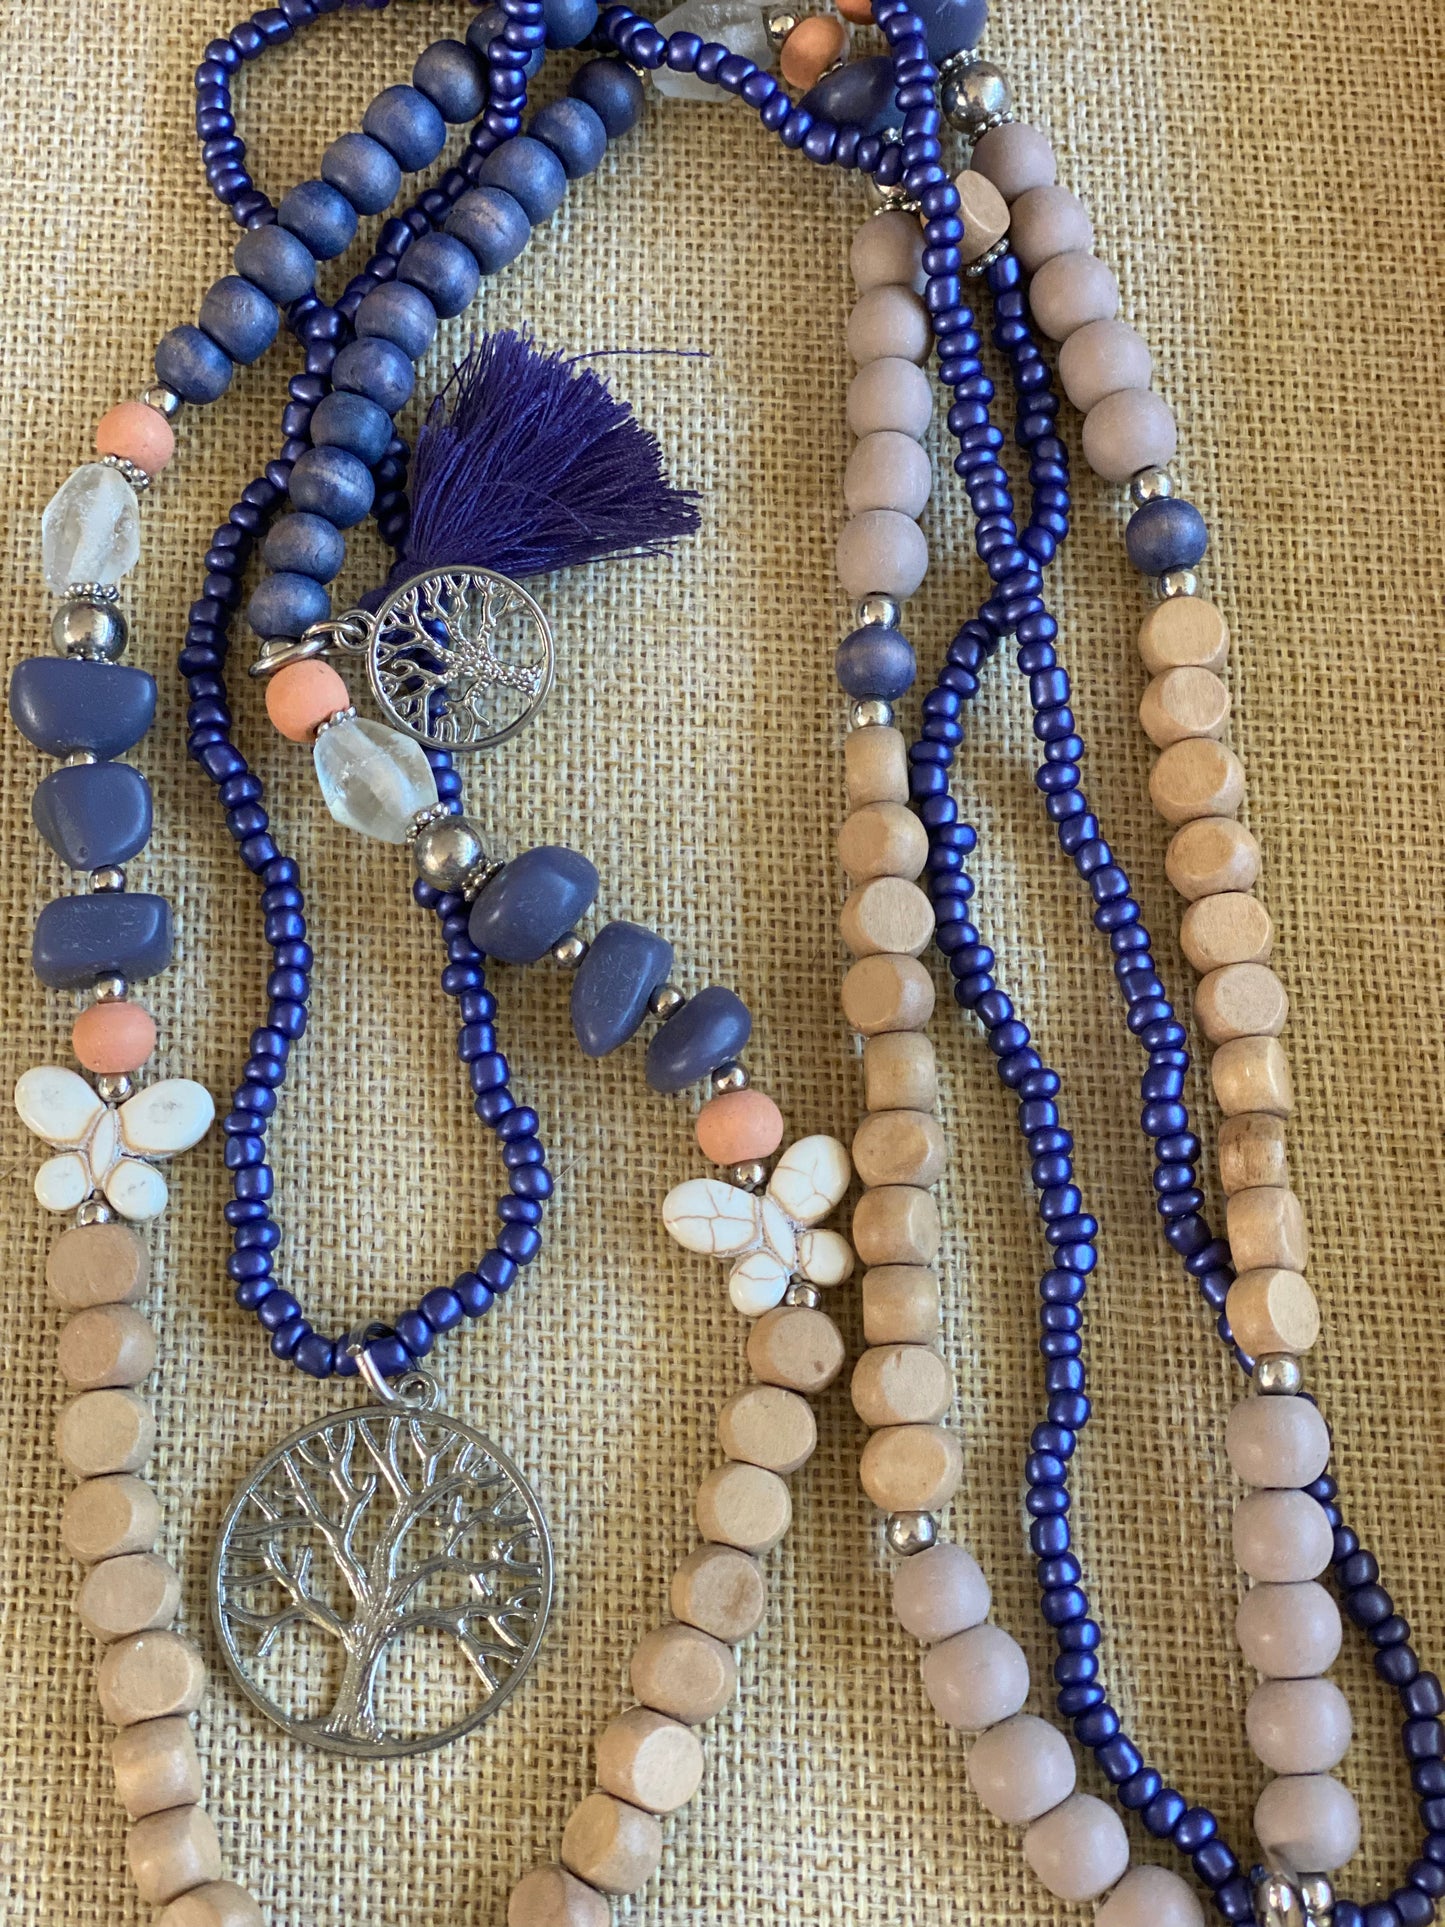 Wood Beads-Heart-Charms Garland Necklace Blue